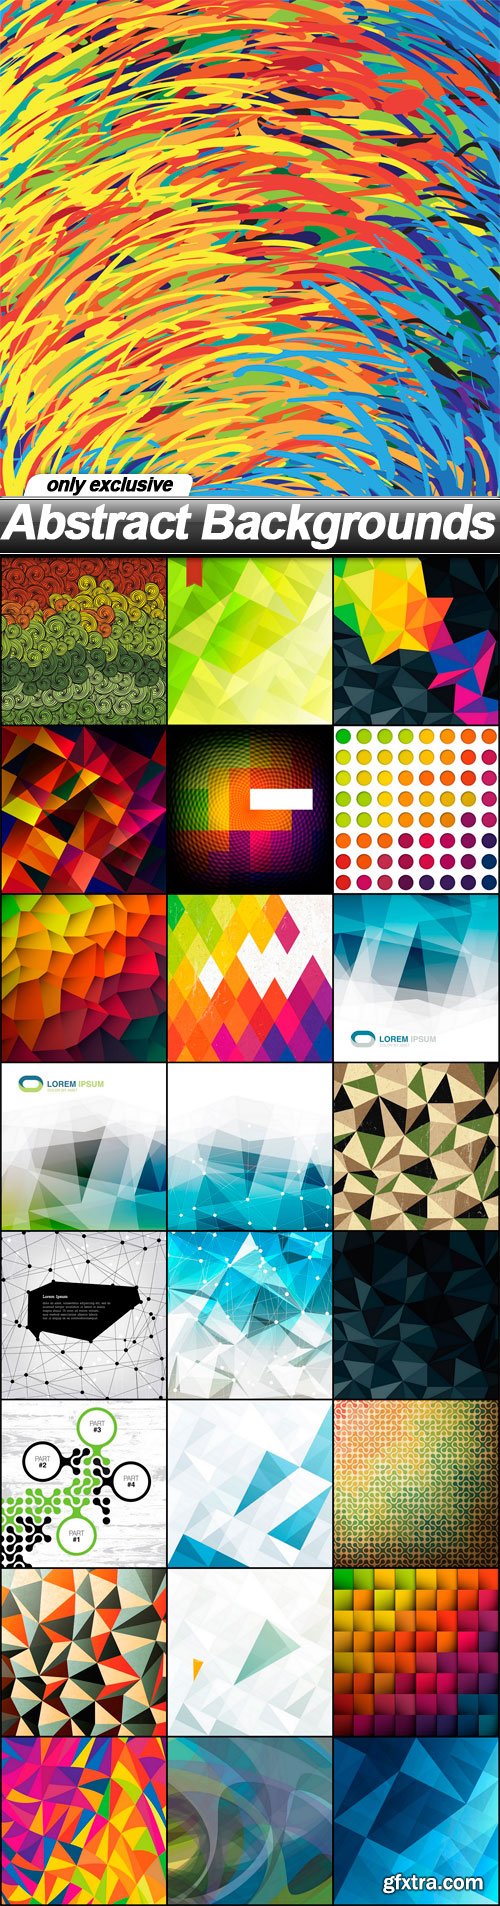 Abstract Backgrounds - 25 EPS